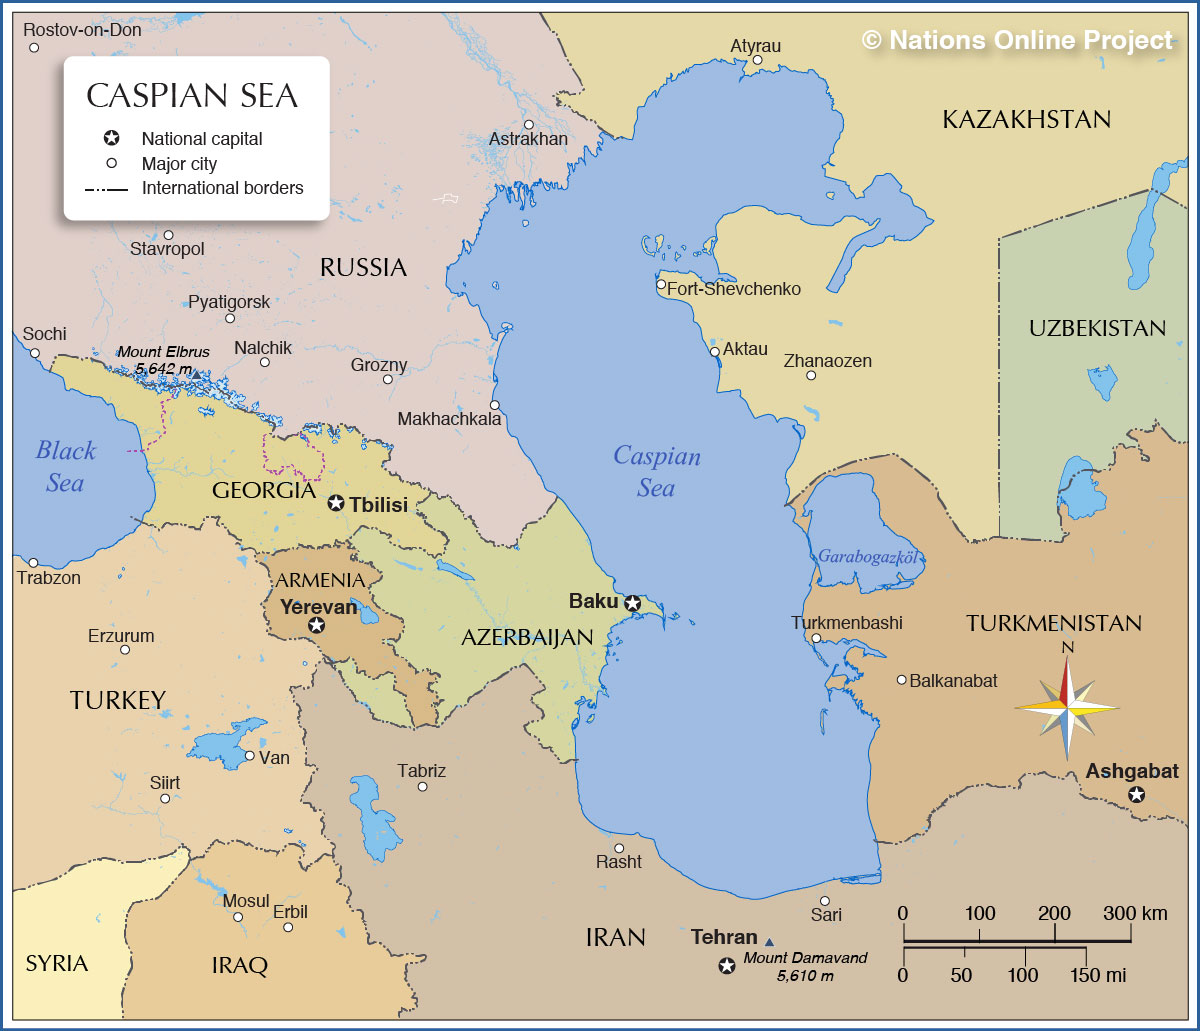 Reference Map of the Caspian Sea